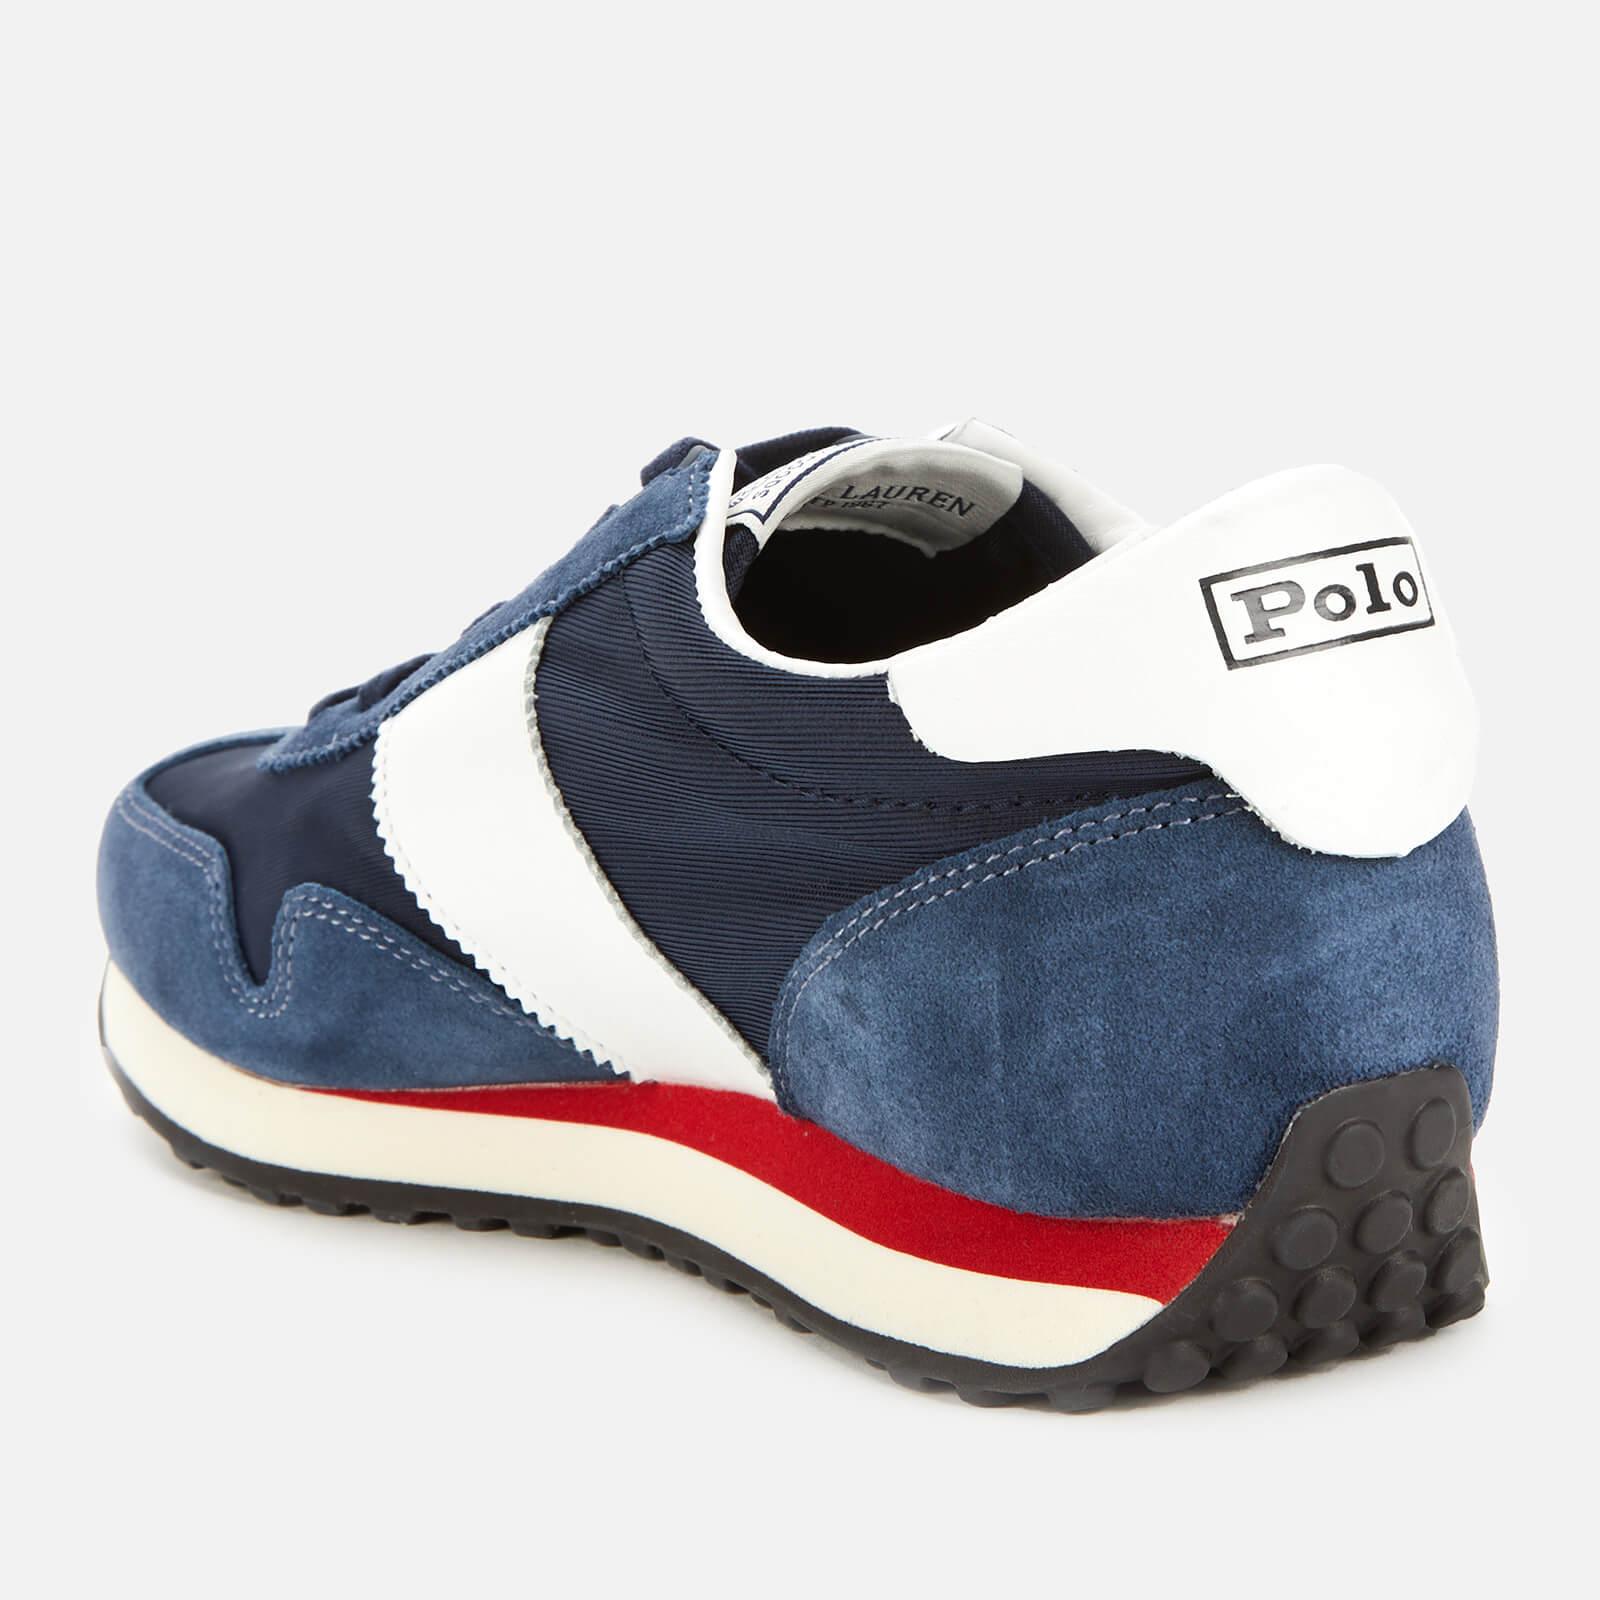 polo ralph lauren with elite cushioning shoes